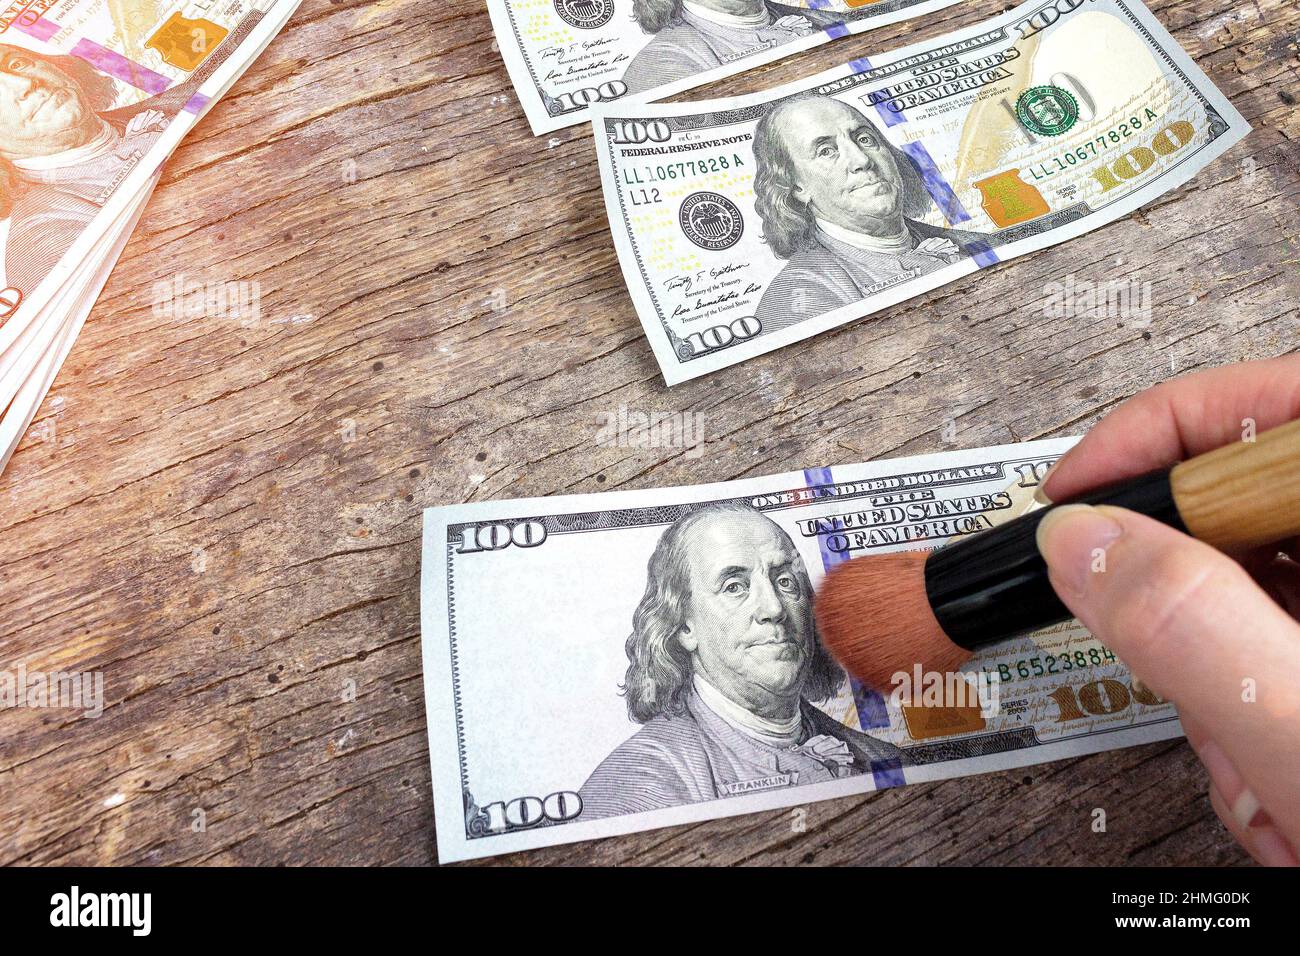 Counterfeiter forges banknotes. New sample money. Illegal production of US dollars Stock Photo